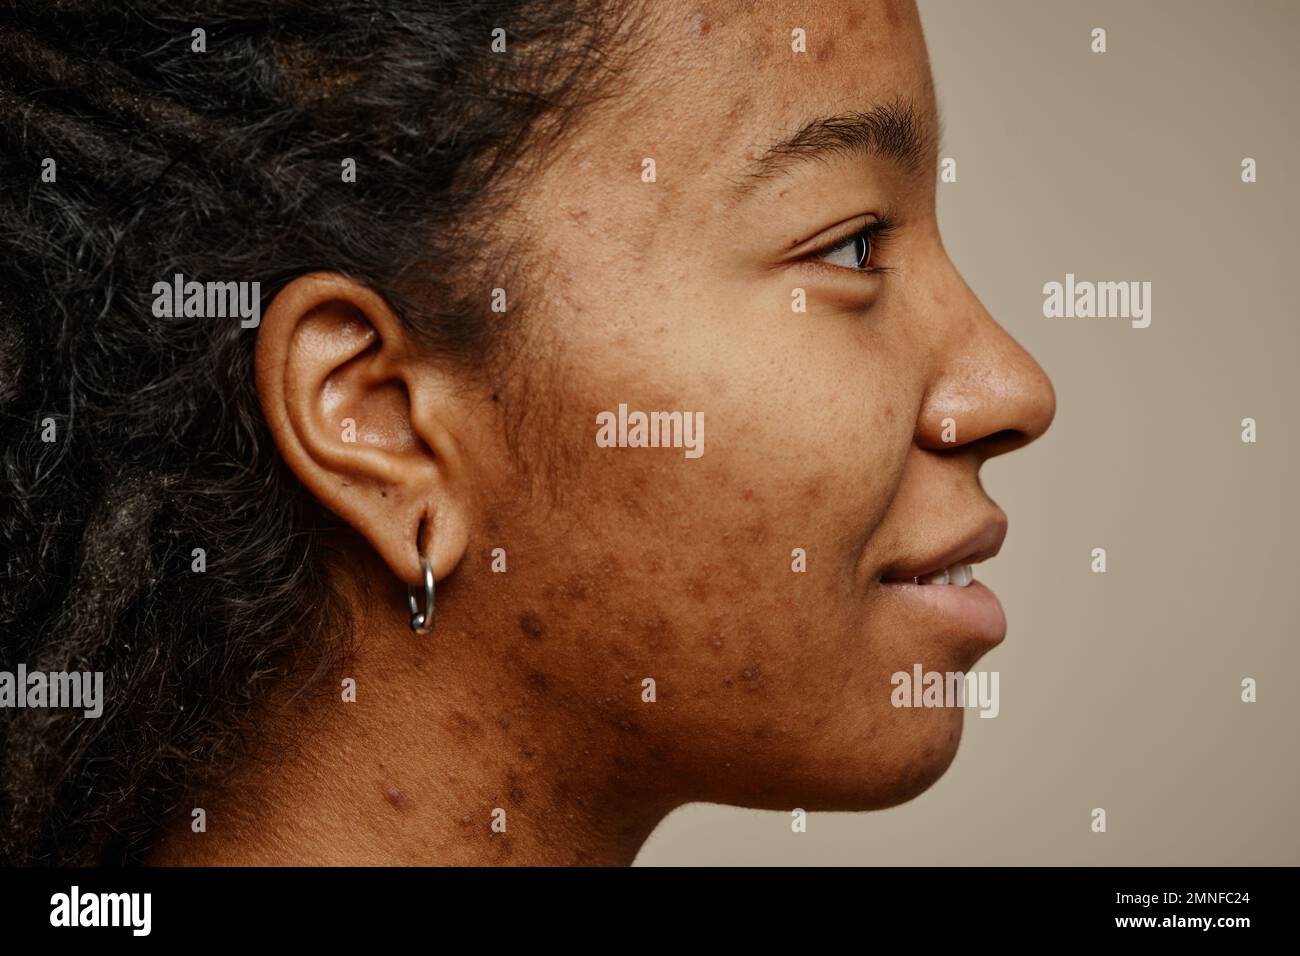 Minimal profile portrait of ethnic young woman smiling with acne scars on face and ear piercings Stock Photo